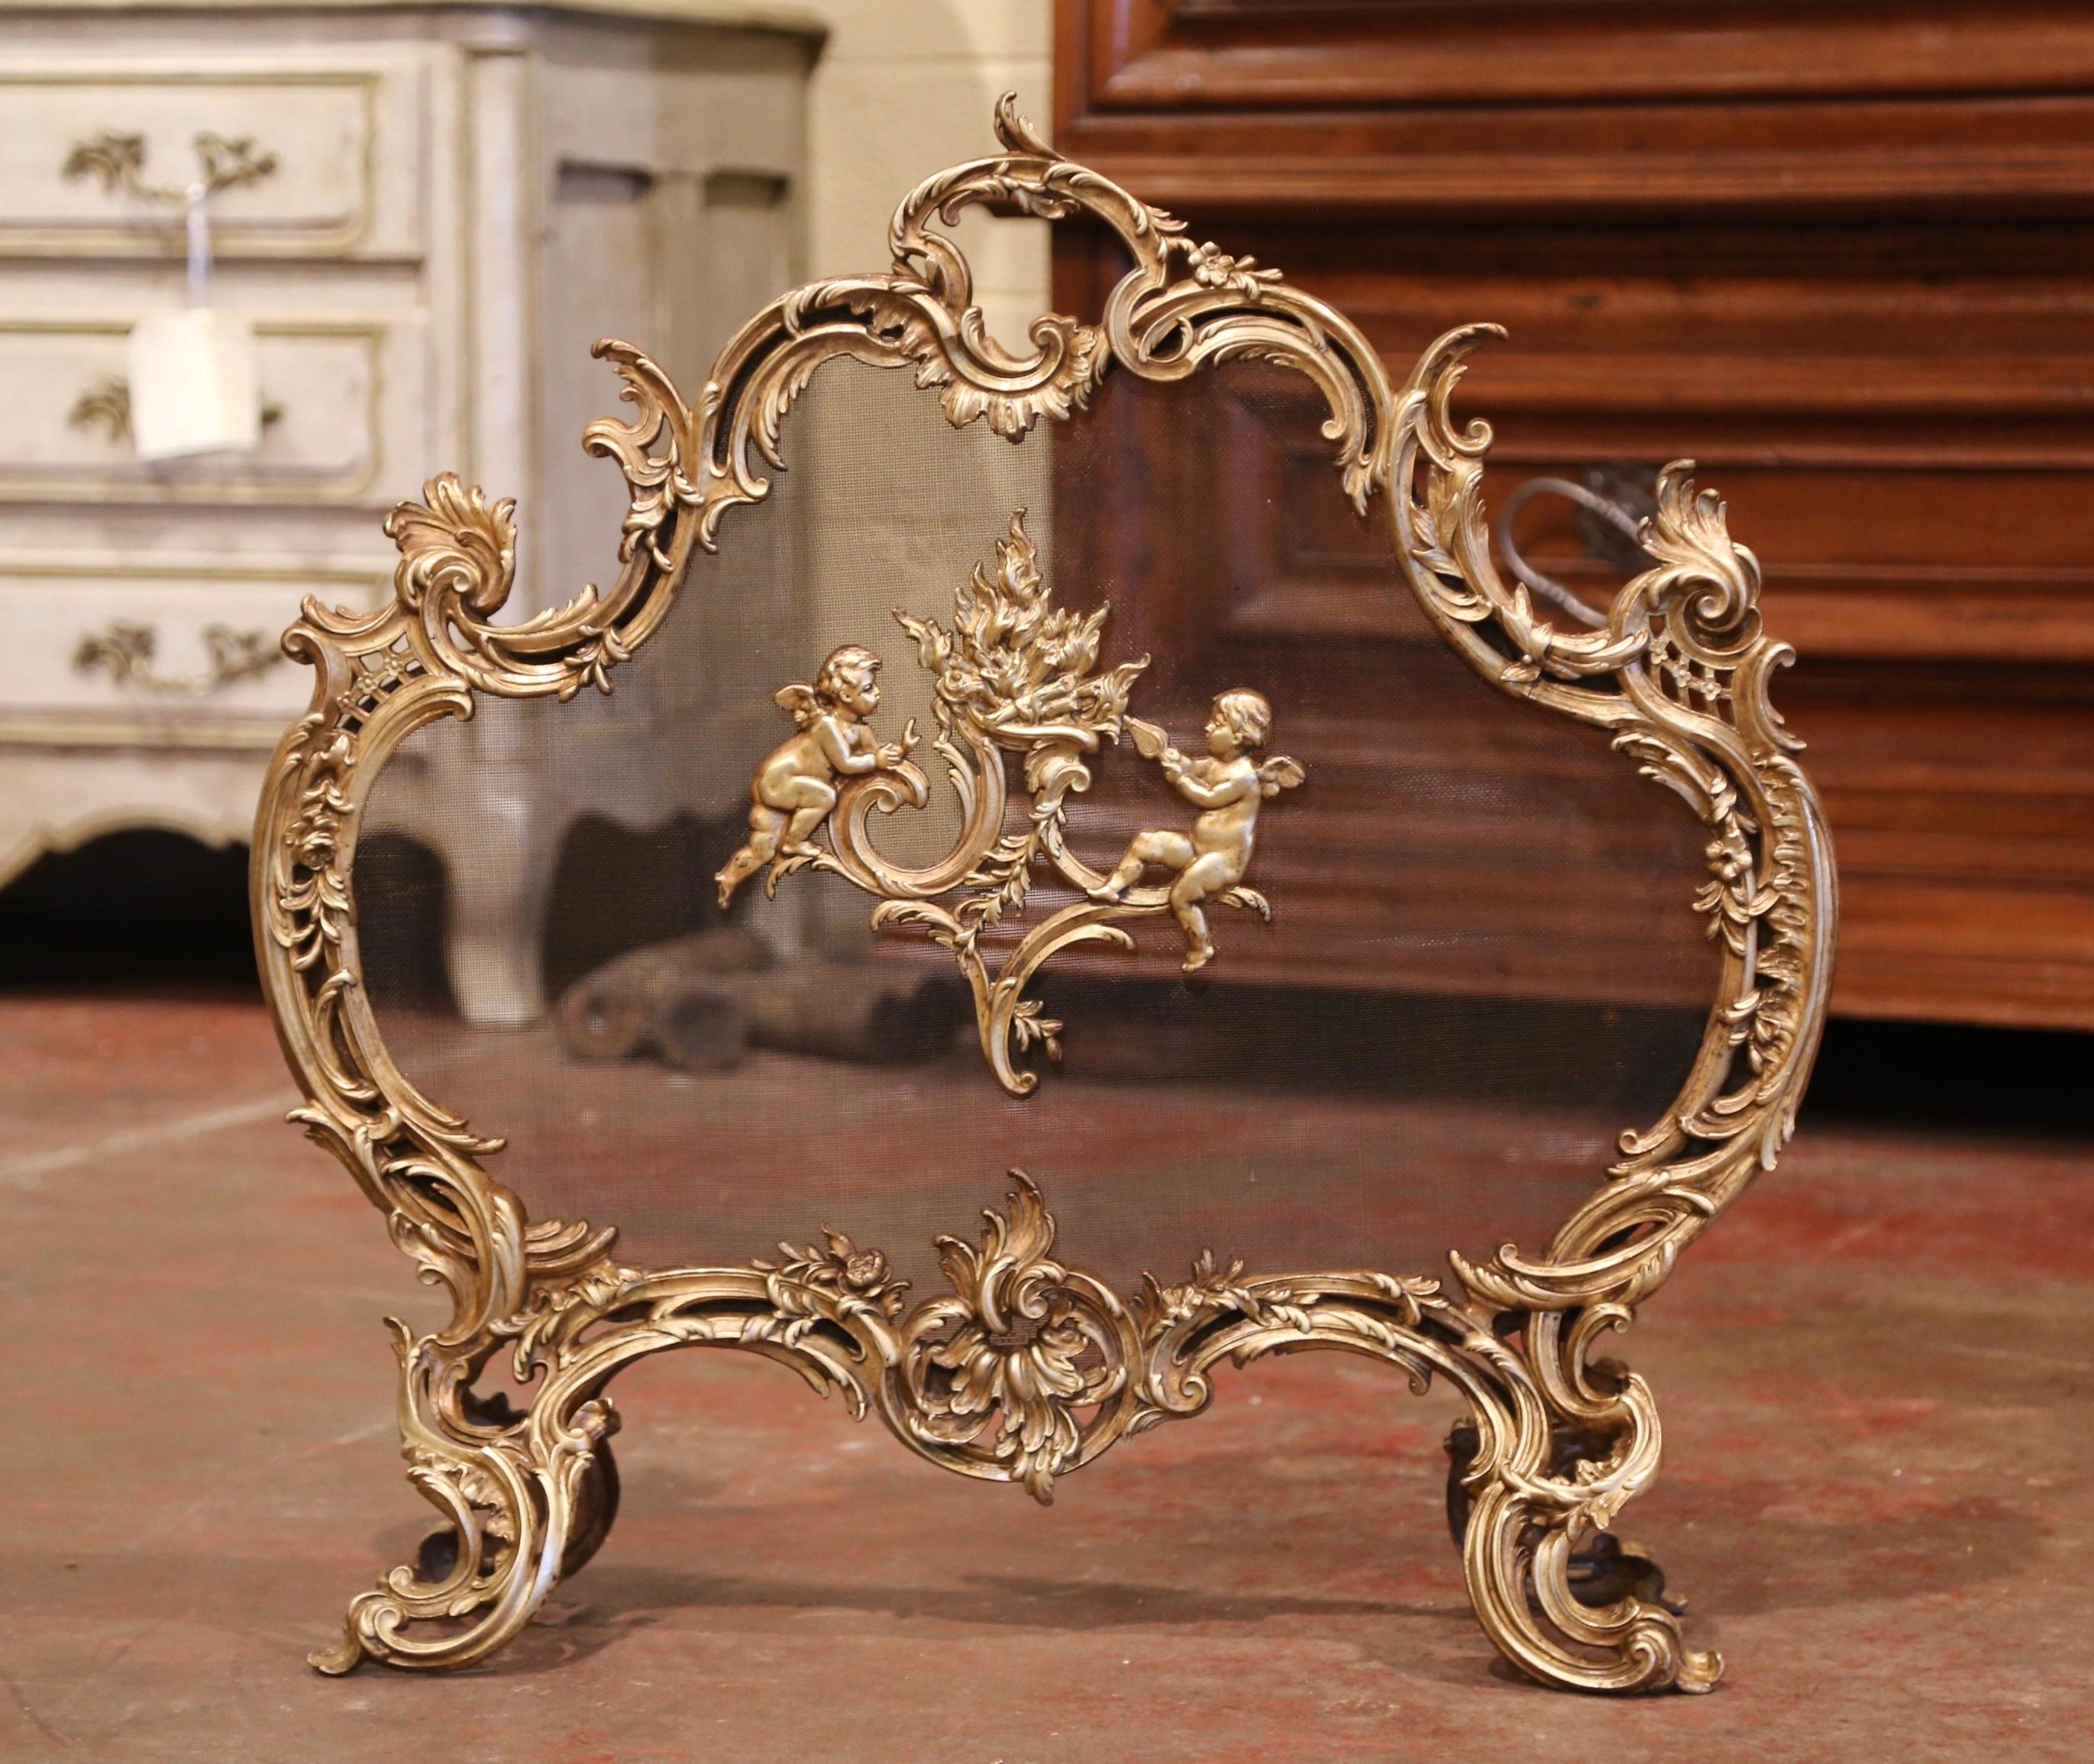 Decorate your fireplace with this elegant antique screen. Crafted in France circa 1870 and made of bronze, the shaped screen sits on four scrolled feet and features traditional Louis XV motifs including asymmetrical foliage swaths; it is further